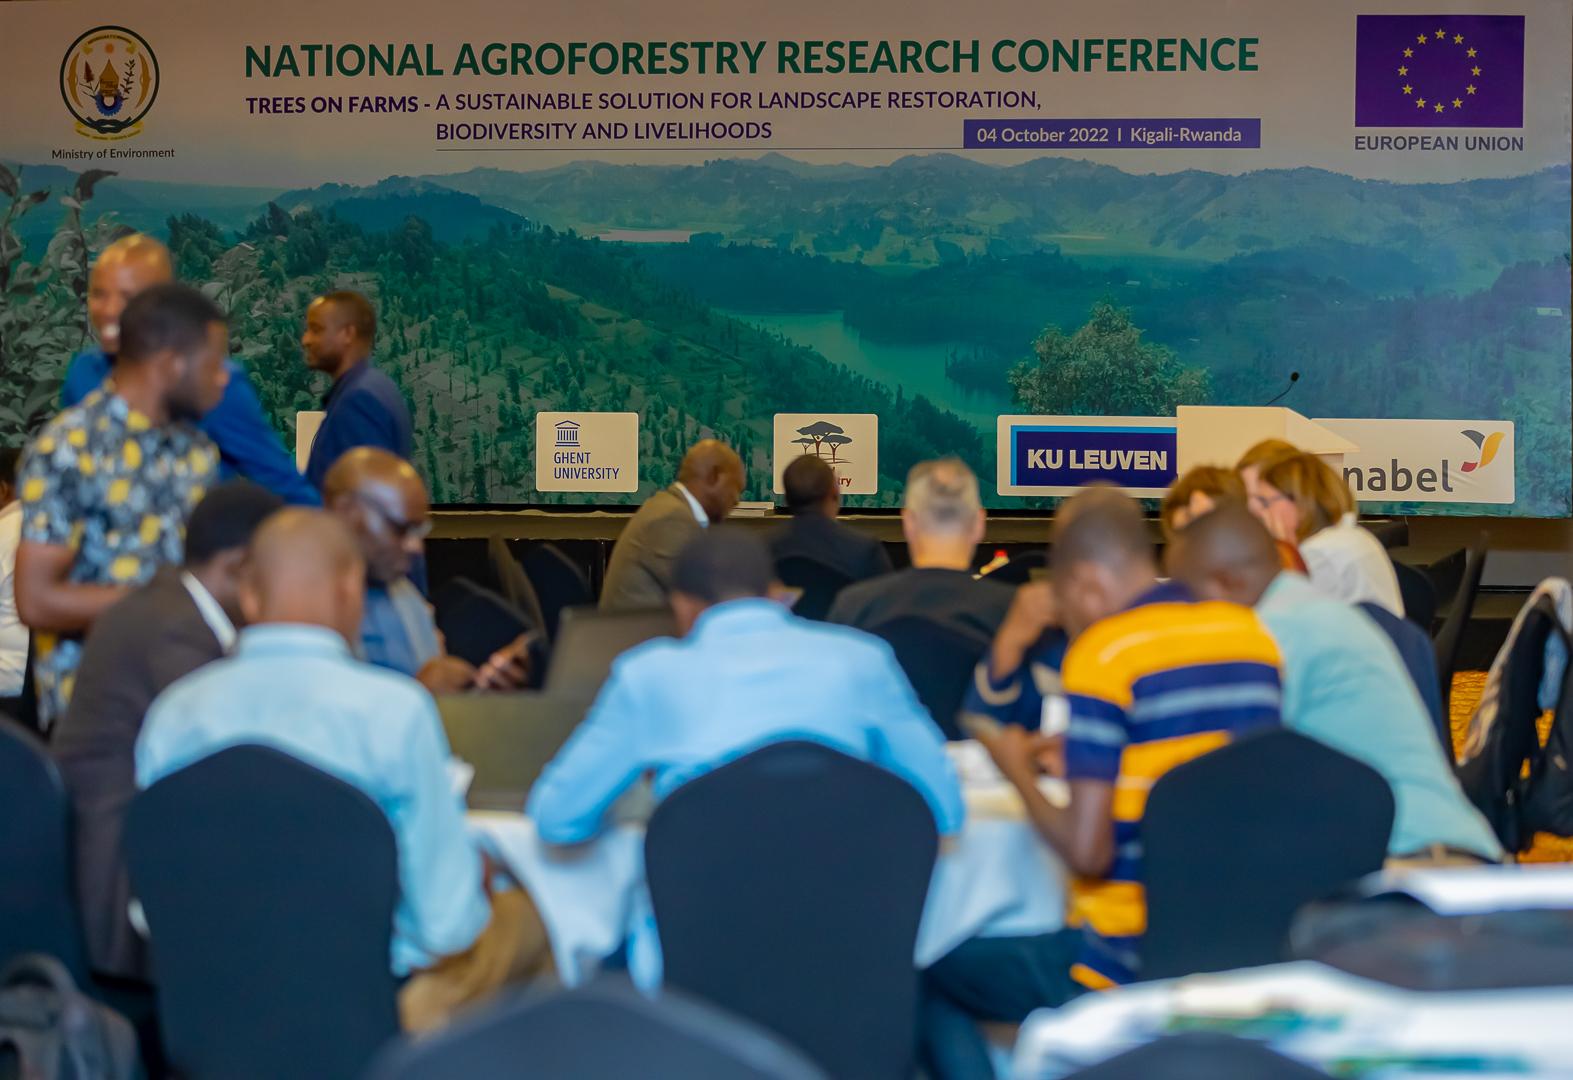 Rwanda: National Agroforestry Research Conference - Trees on Farms for Landscape Restoration, Biodiversity and Livelihoods